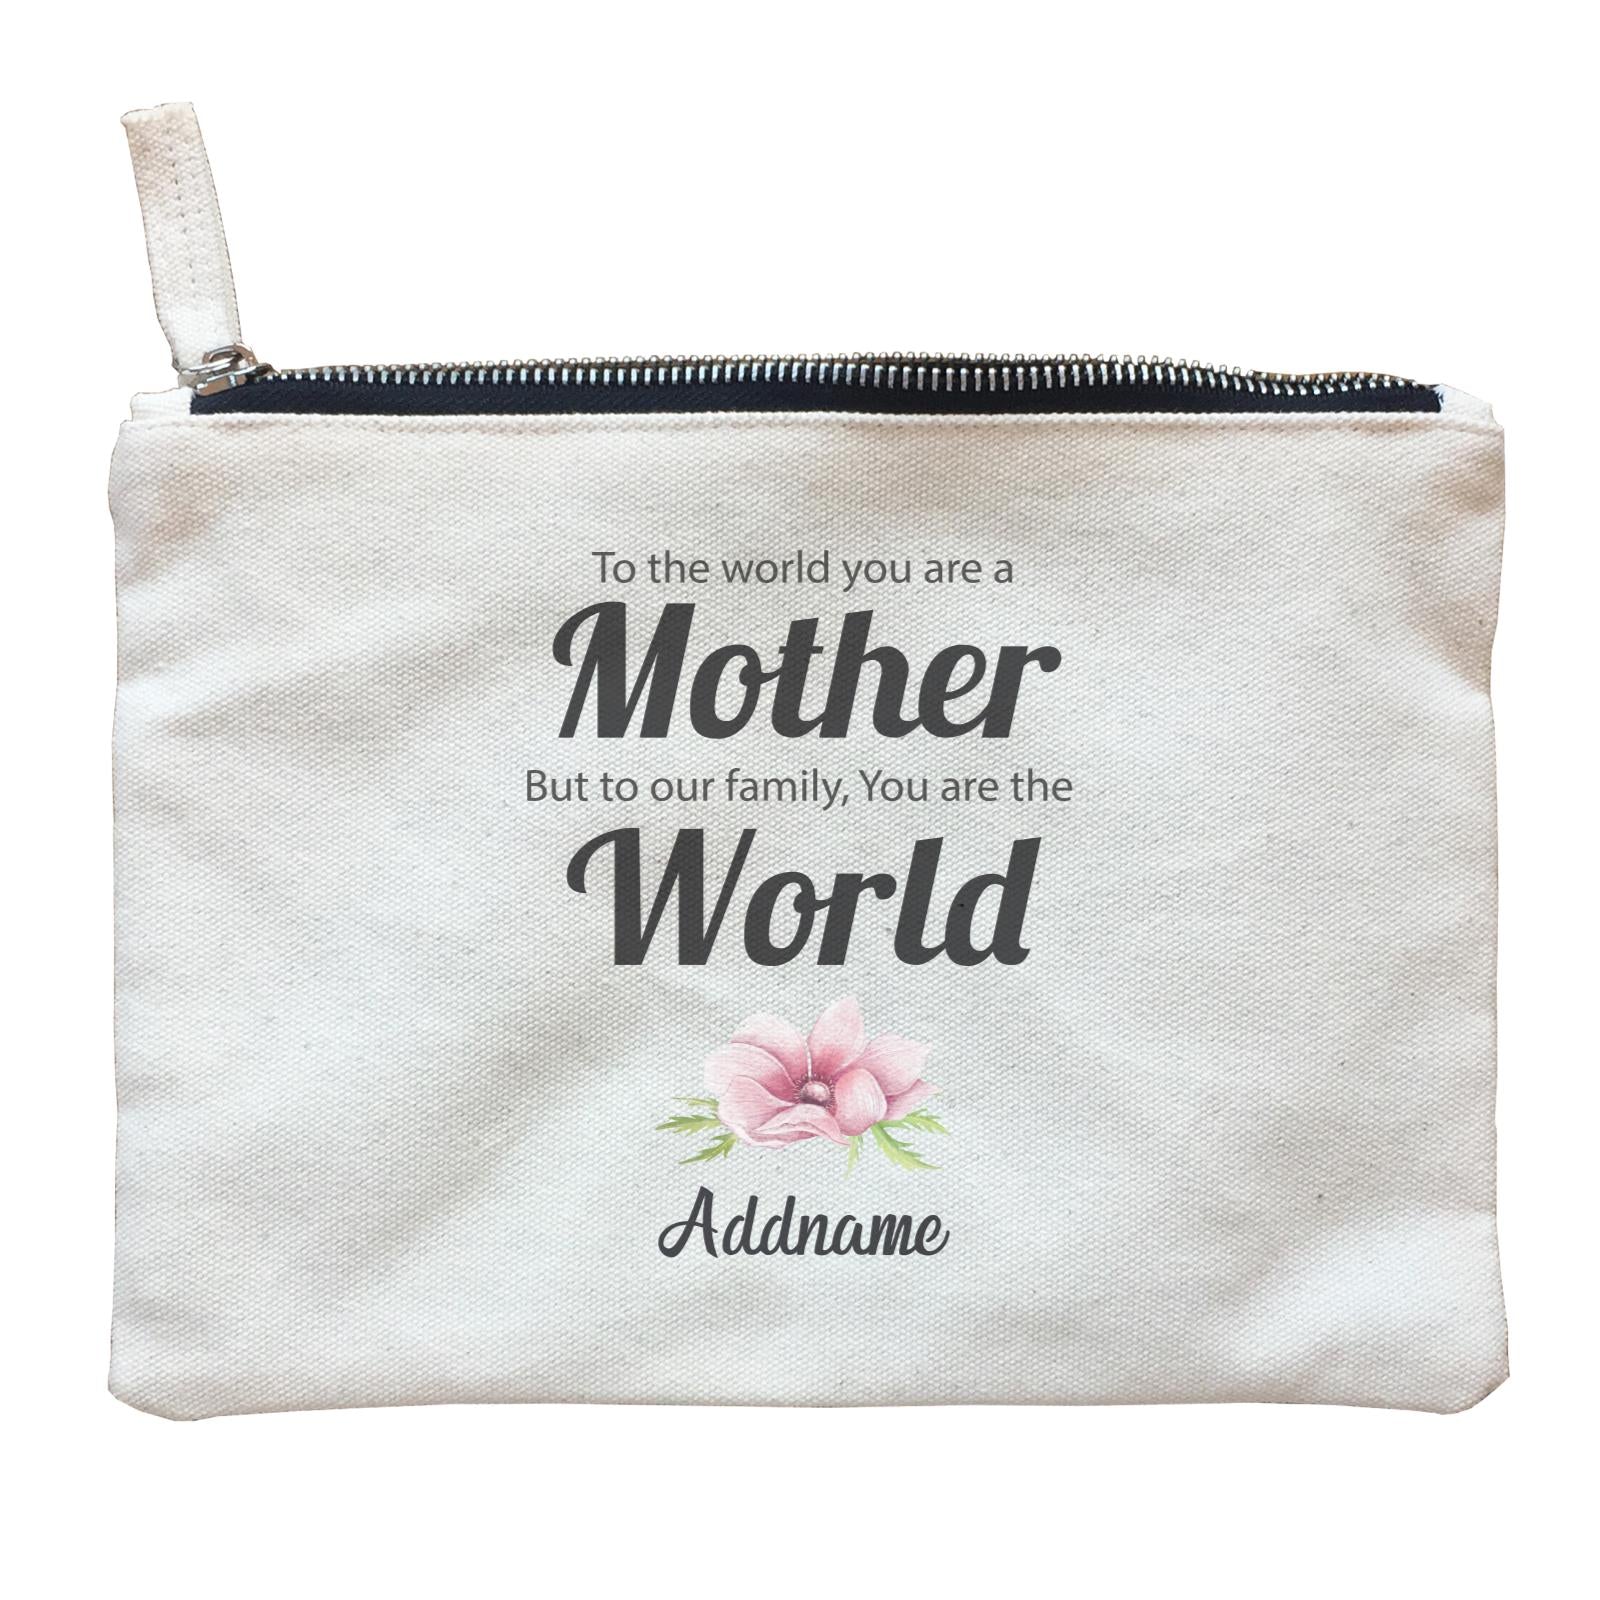 Sweet Mom Quotes 1 To The World You Are A Mother But To Our Family, You Are The World Addname Zipper Pouch